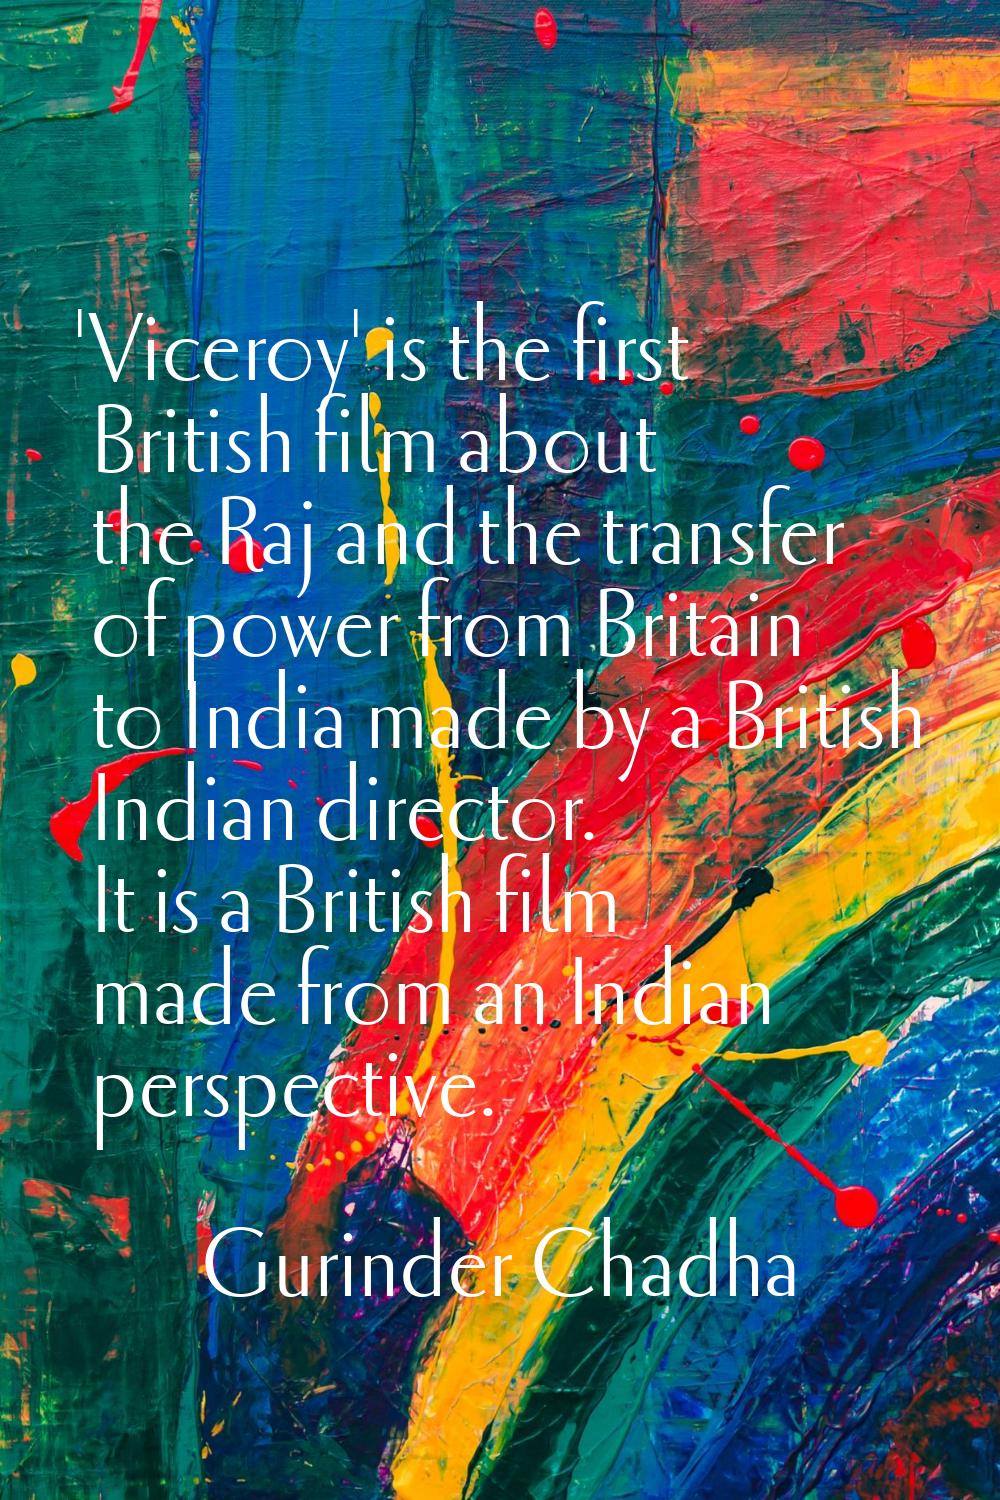 'Viceroy' is the first British film about the Raj and the transfer of power from Britain to India m